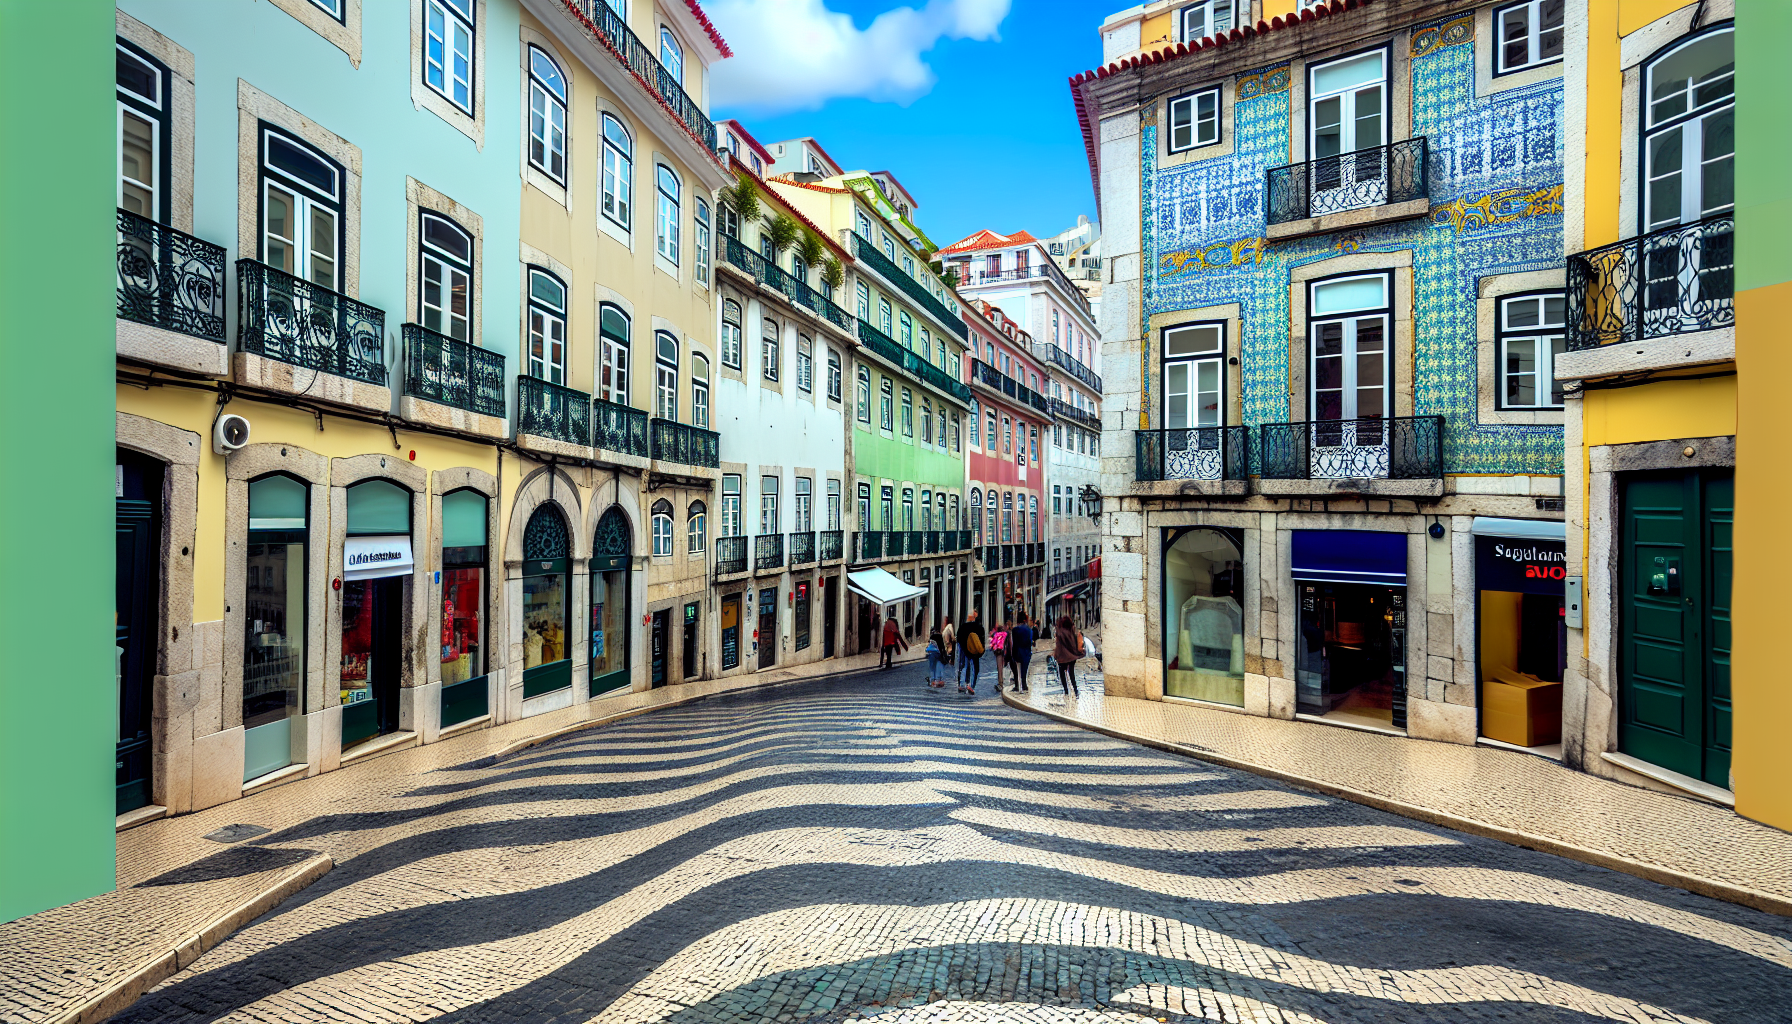 Historic city center of Lisbon with cobblestone streets and traditional architecture